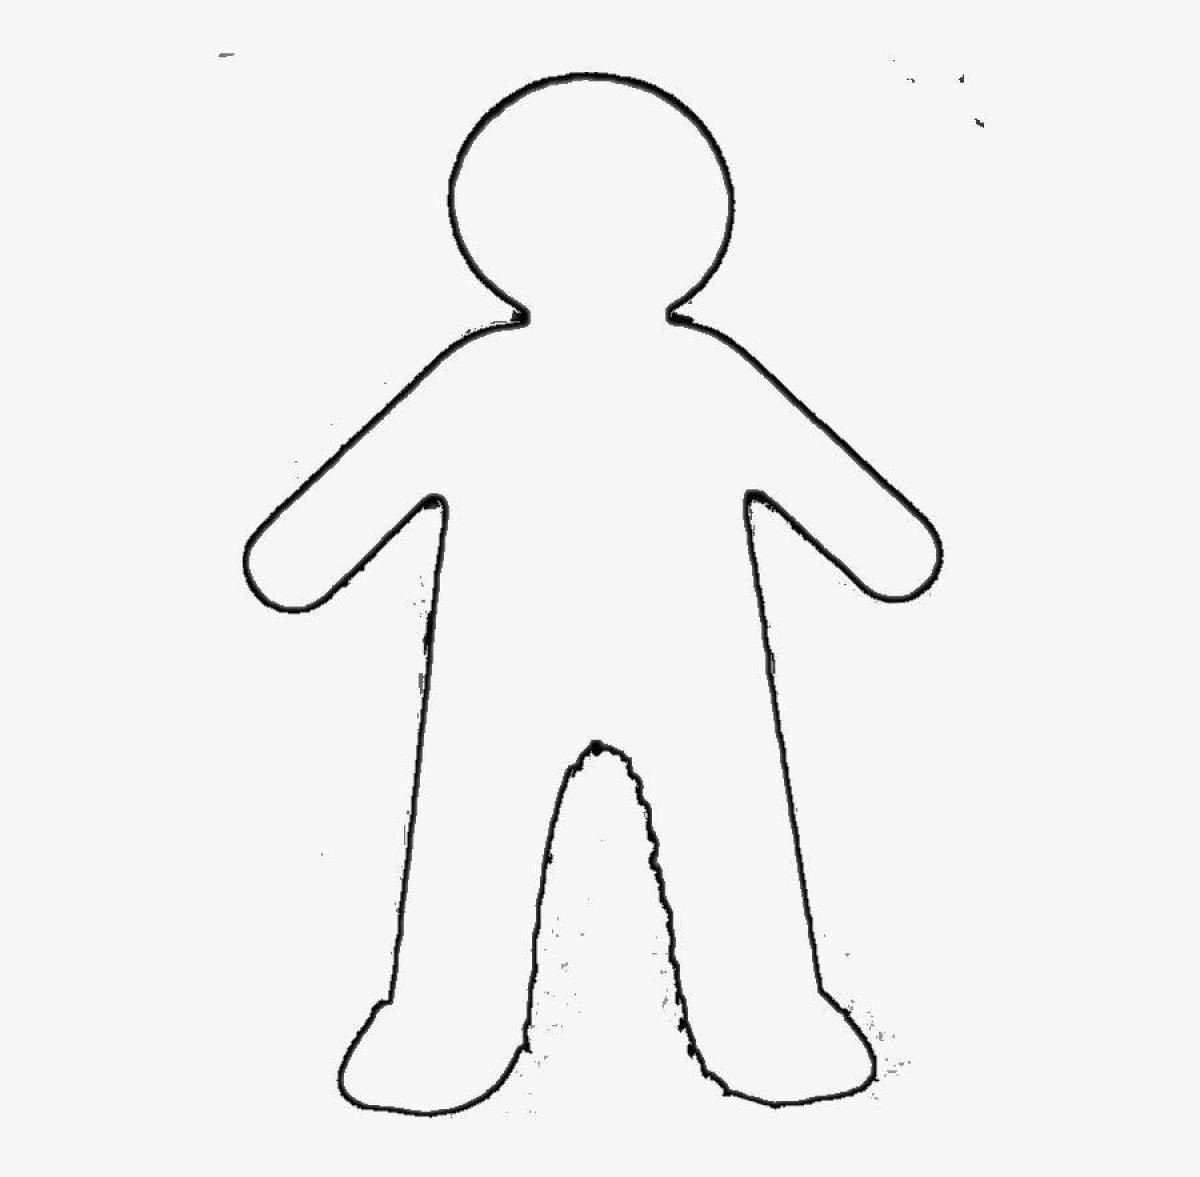 Colorful human figure coloring page for kids